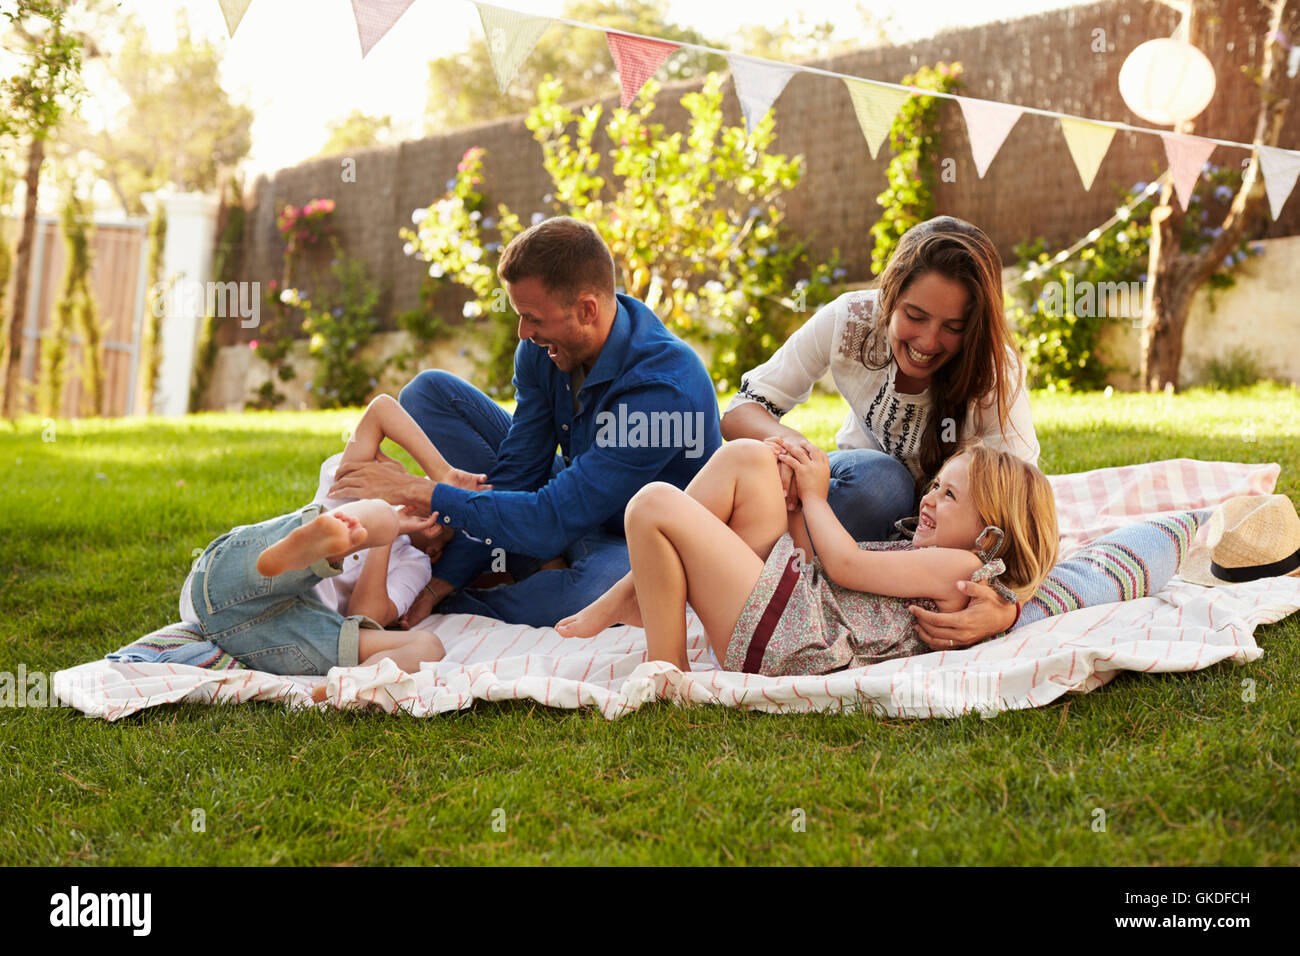 Parents Playing Game With Children On Blanket In Garden Stock Photo